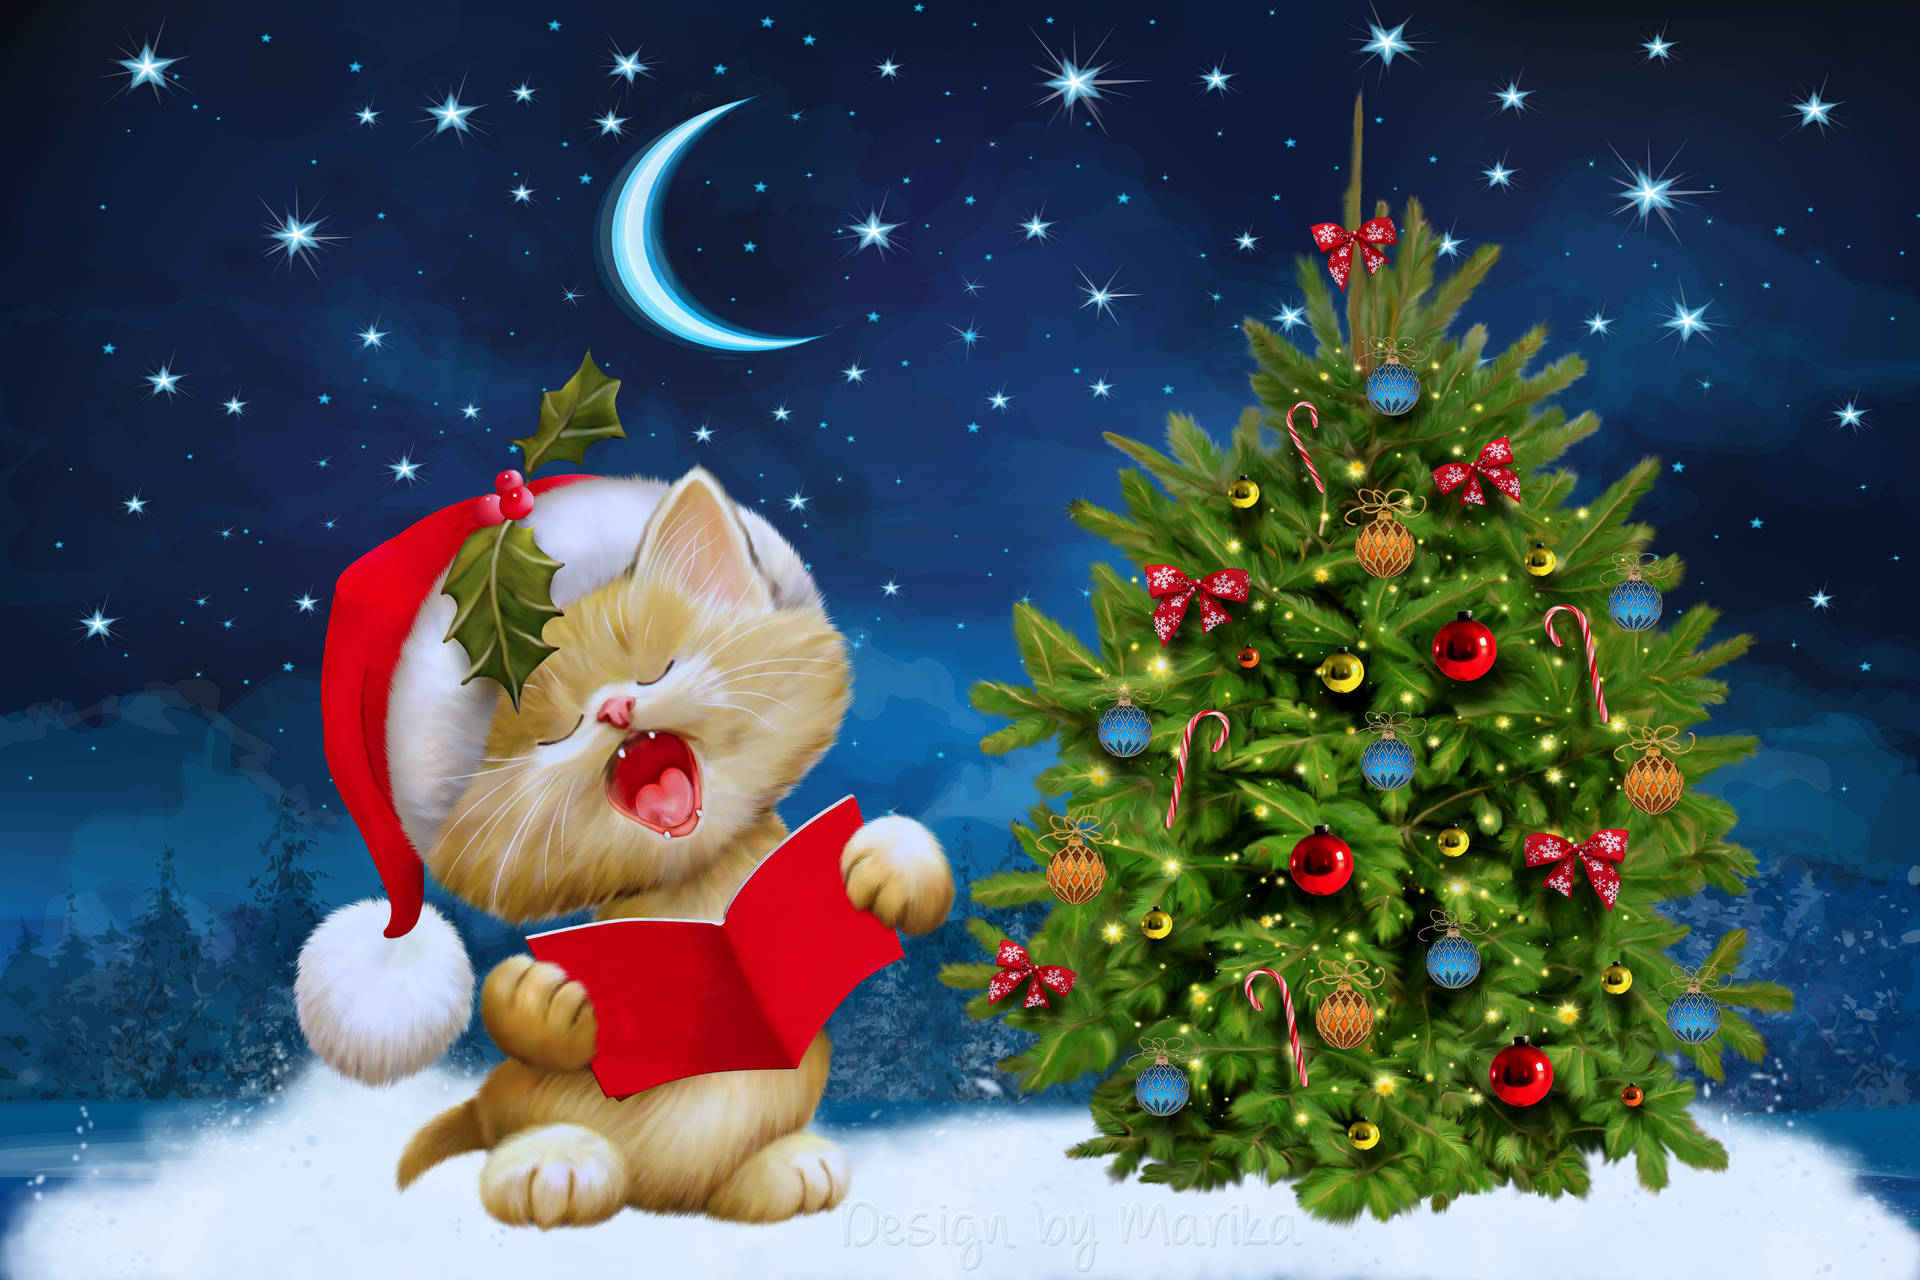 A Cat's New Year's Dream - Celebrating The Holiday With Comfort And Joy! Wallpaper